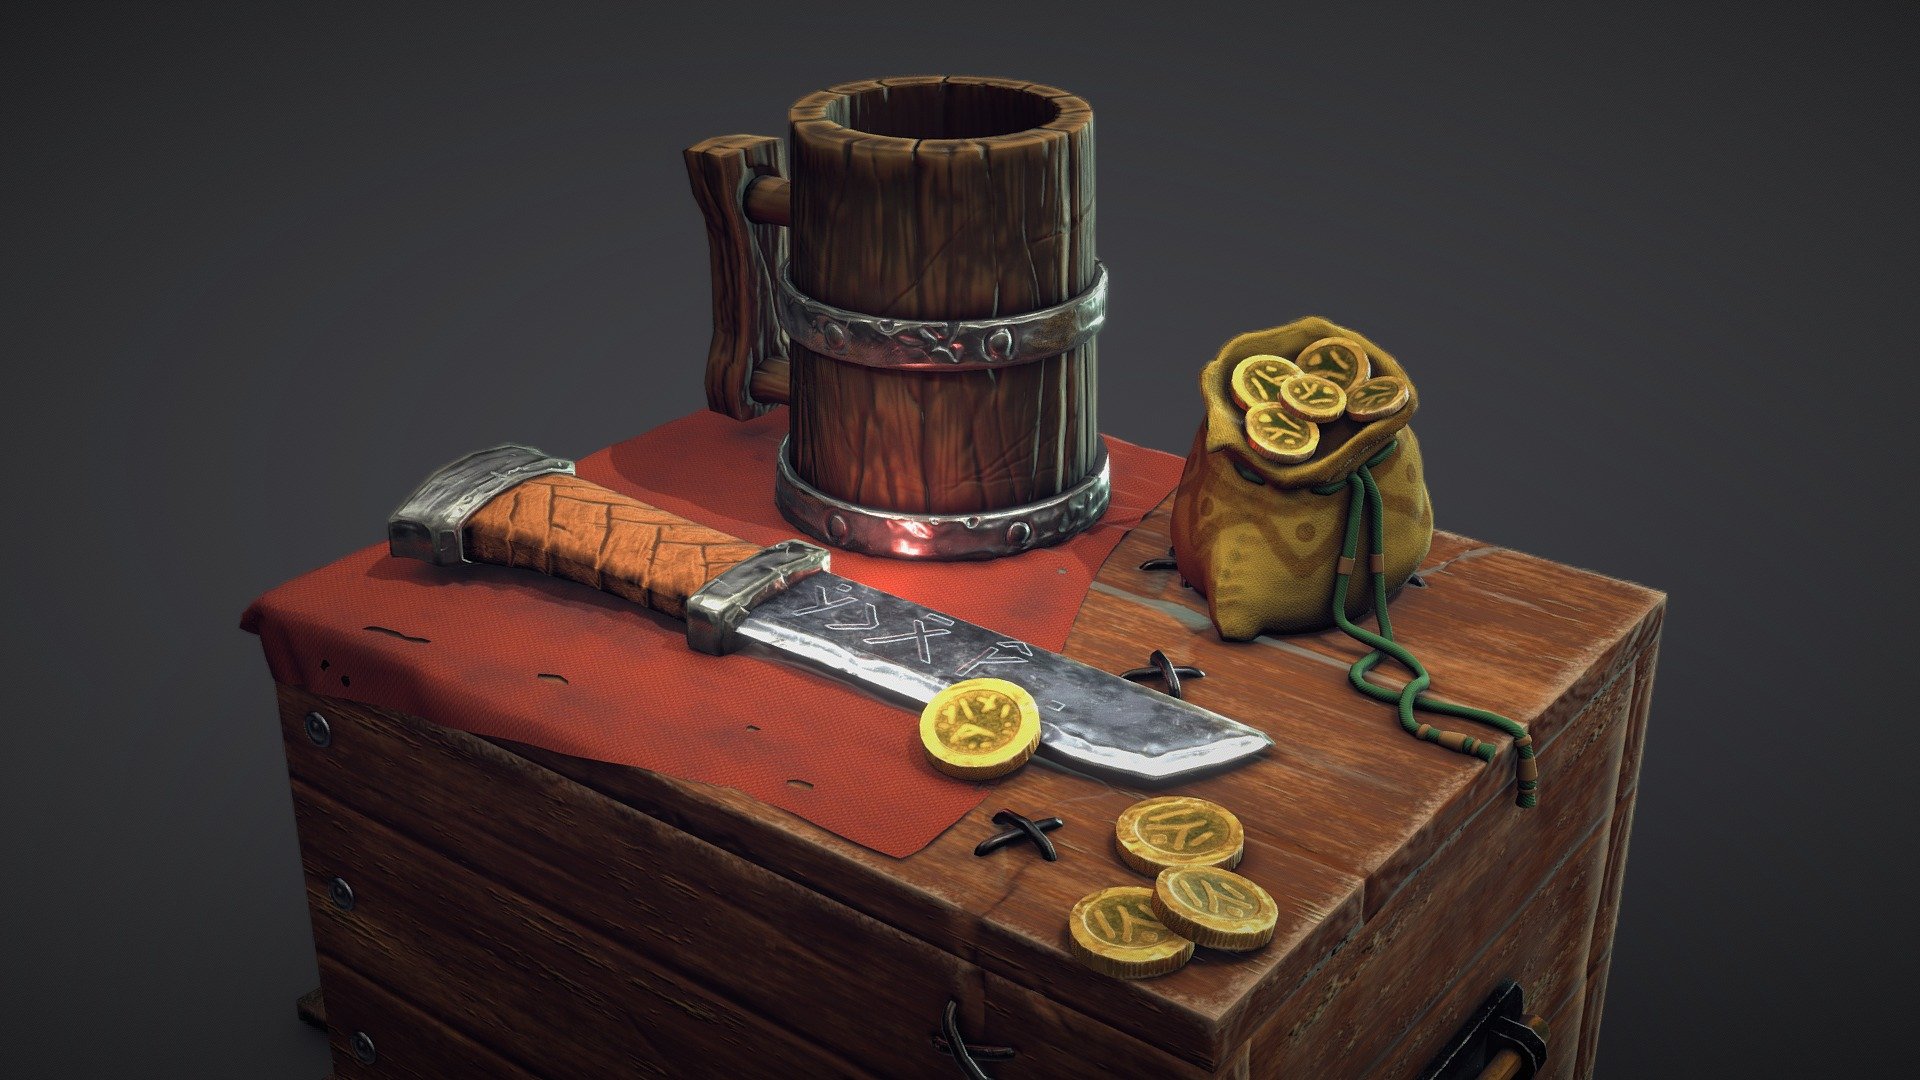 Concept Art by Masha Kuravcova
https://www.behance.net/Mashuly

https://www.behance.net/gallery/36742107/still-life-dwarf

The concept was used as a basis for practice. Yes, the end result is different from the original, but I tried to convey the essence of the author's intention 3d model